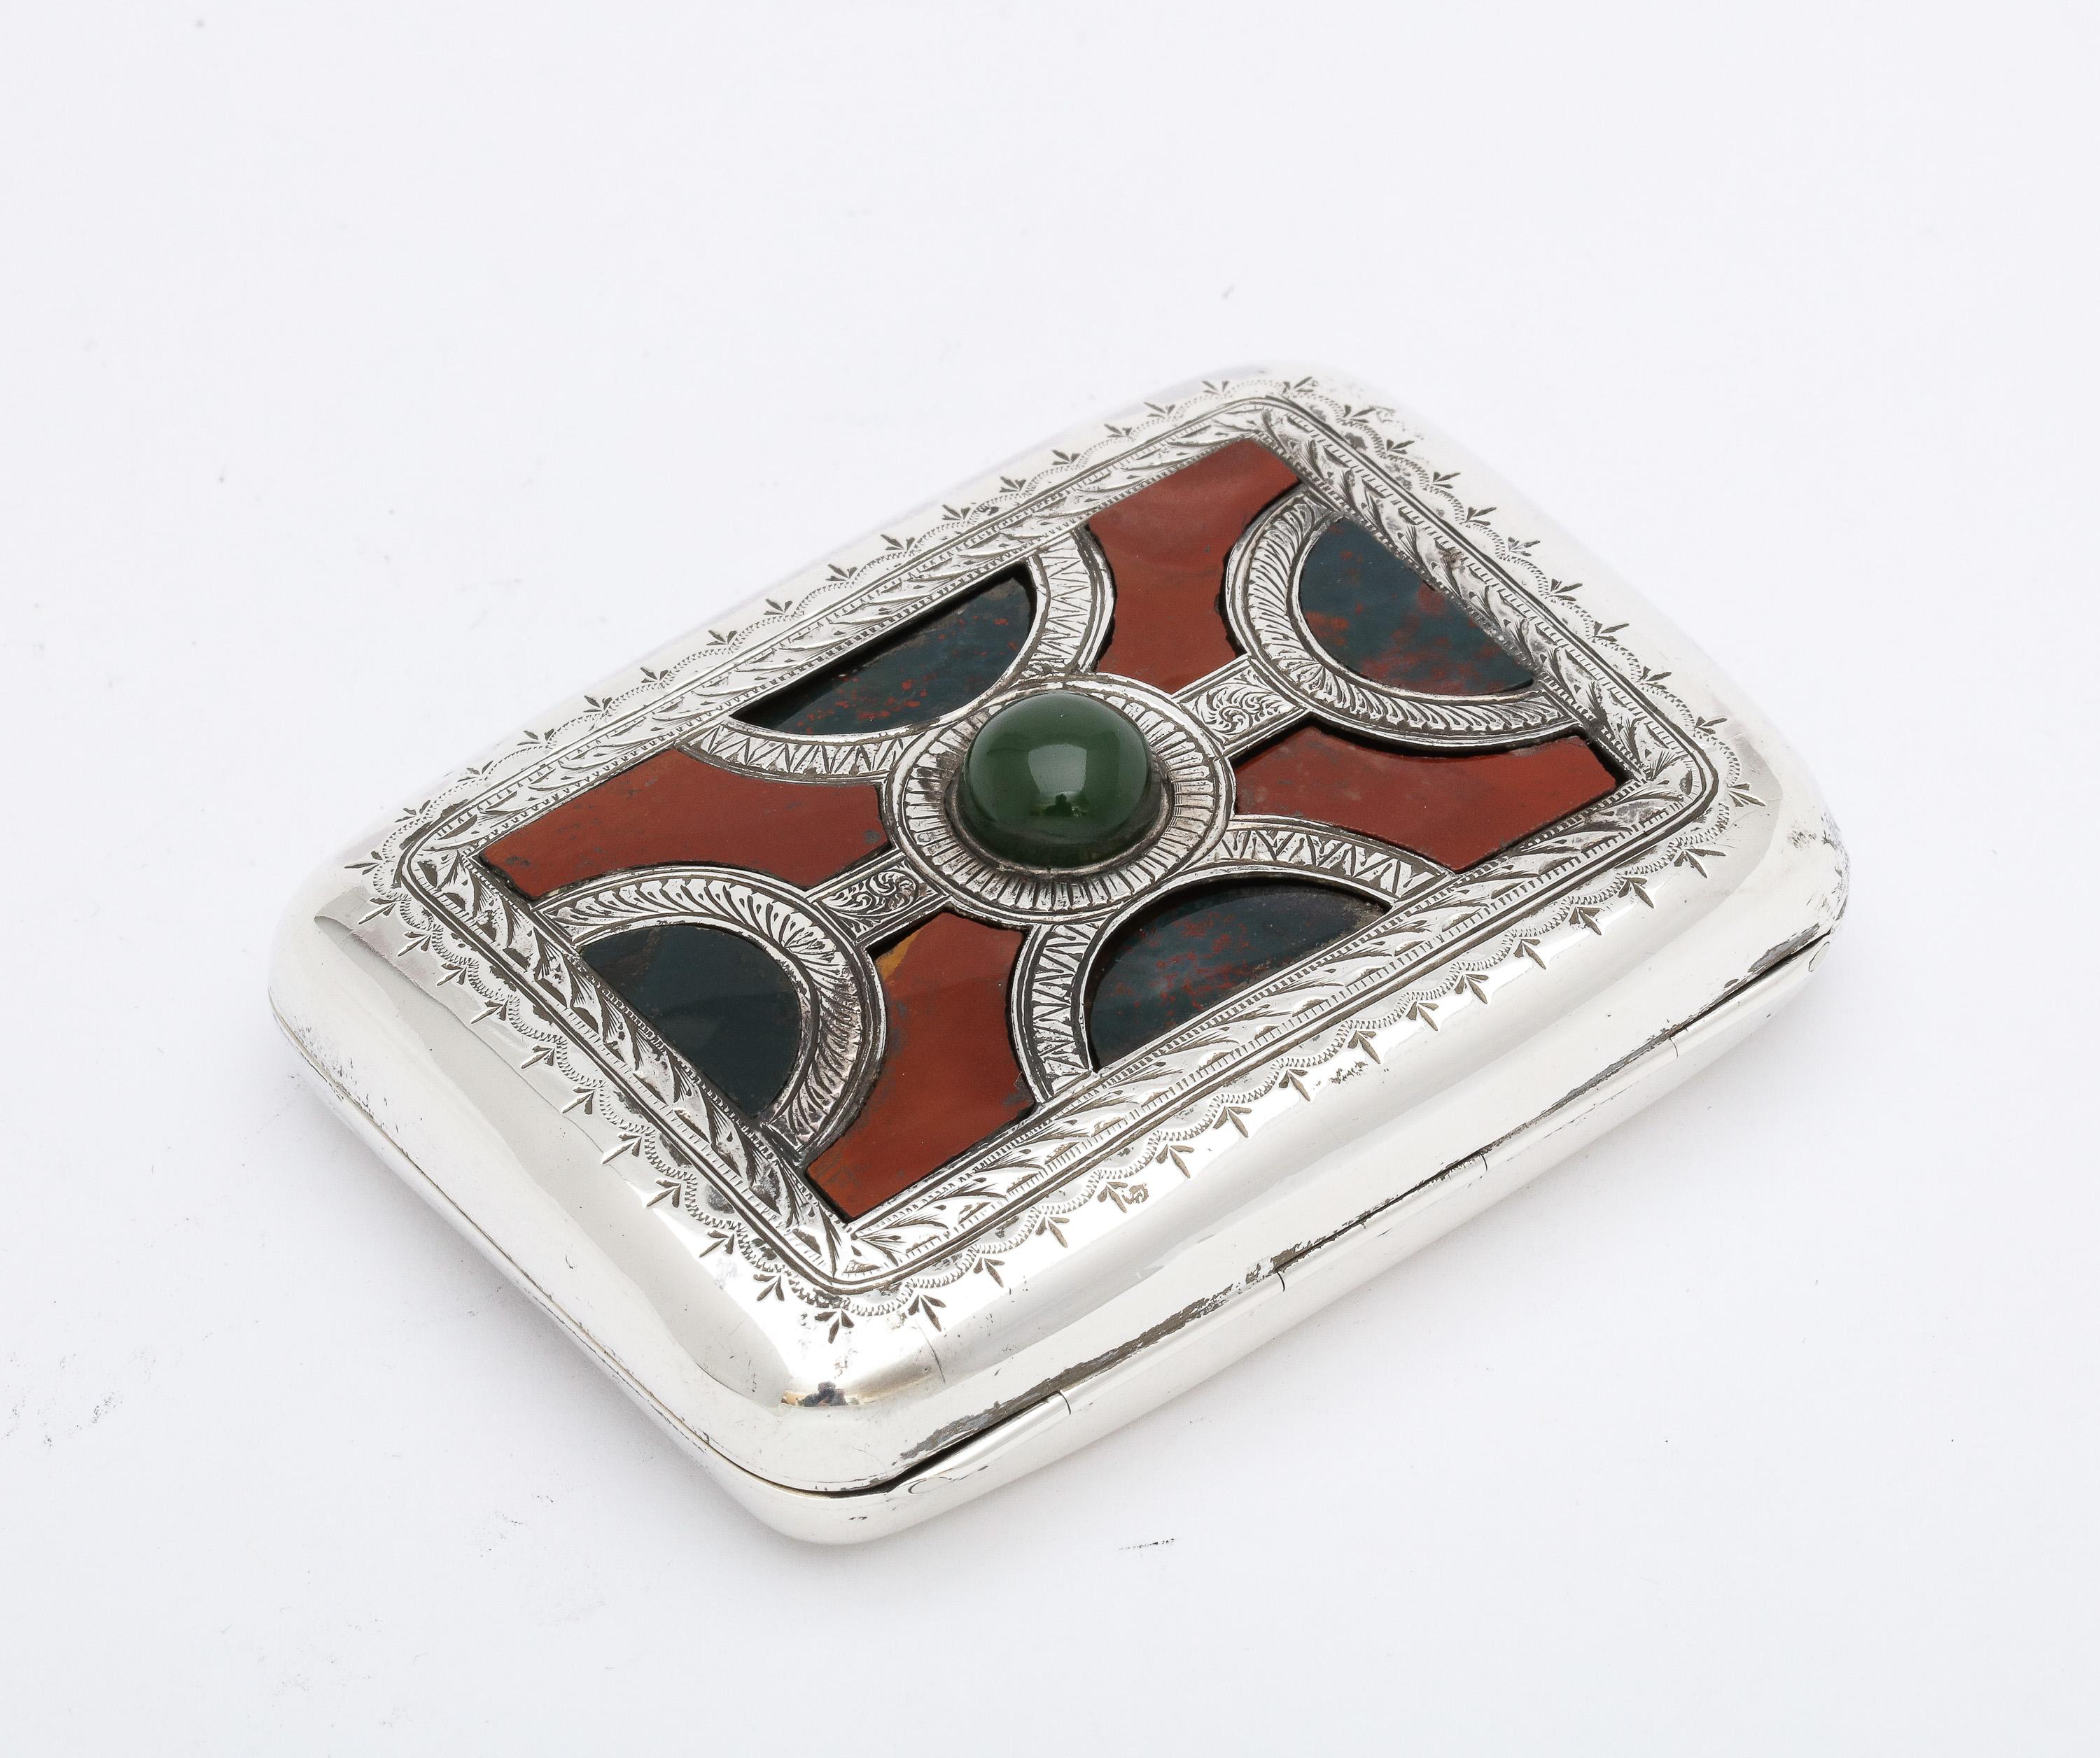 Early 20th Century Rare Edwardian Sterling Silver and Scottish Agate Cigarette Case